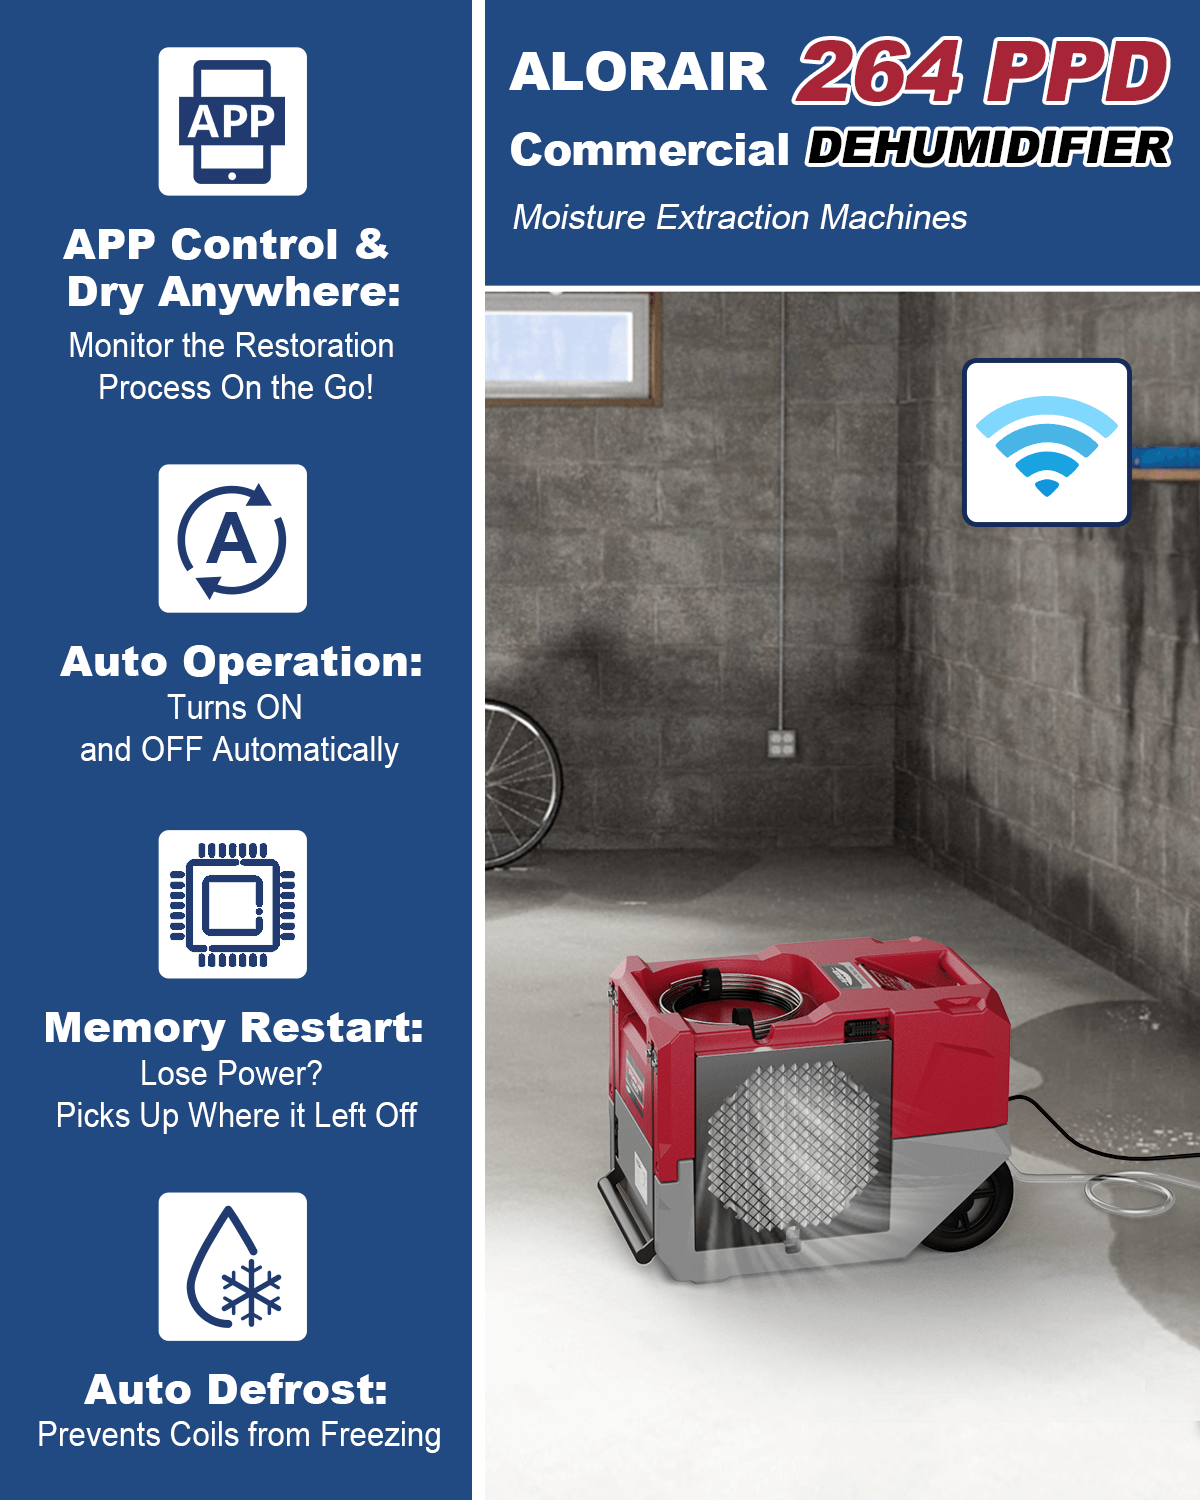 AlorAir Storm LGR 1250X Smart Wi-Fi 125 PPD Industrial Commercial Dehumidifiers with Pump, LGR 1250X Large Dehumidifier with Wi-Fi Controls, for Basements, Garages, and Job Sites, Red AlorAird